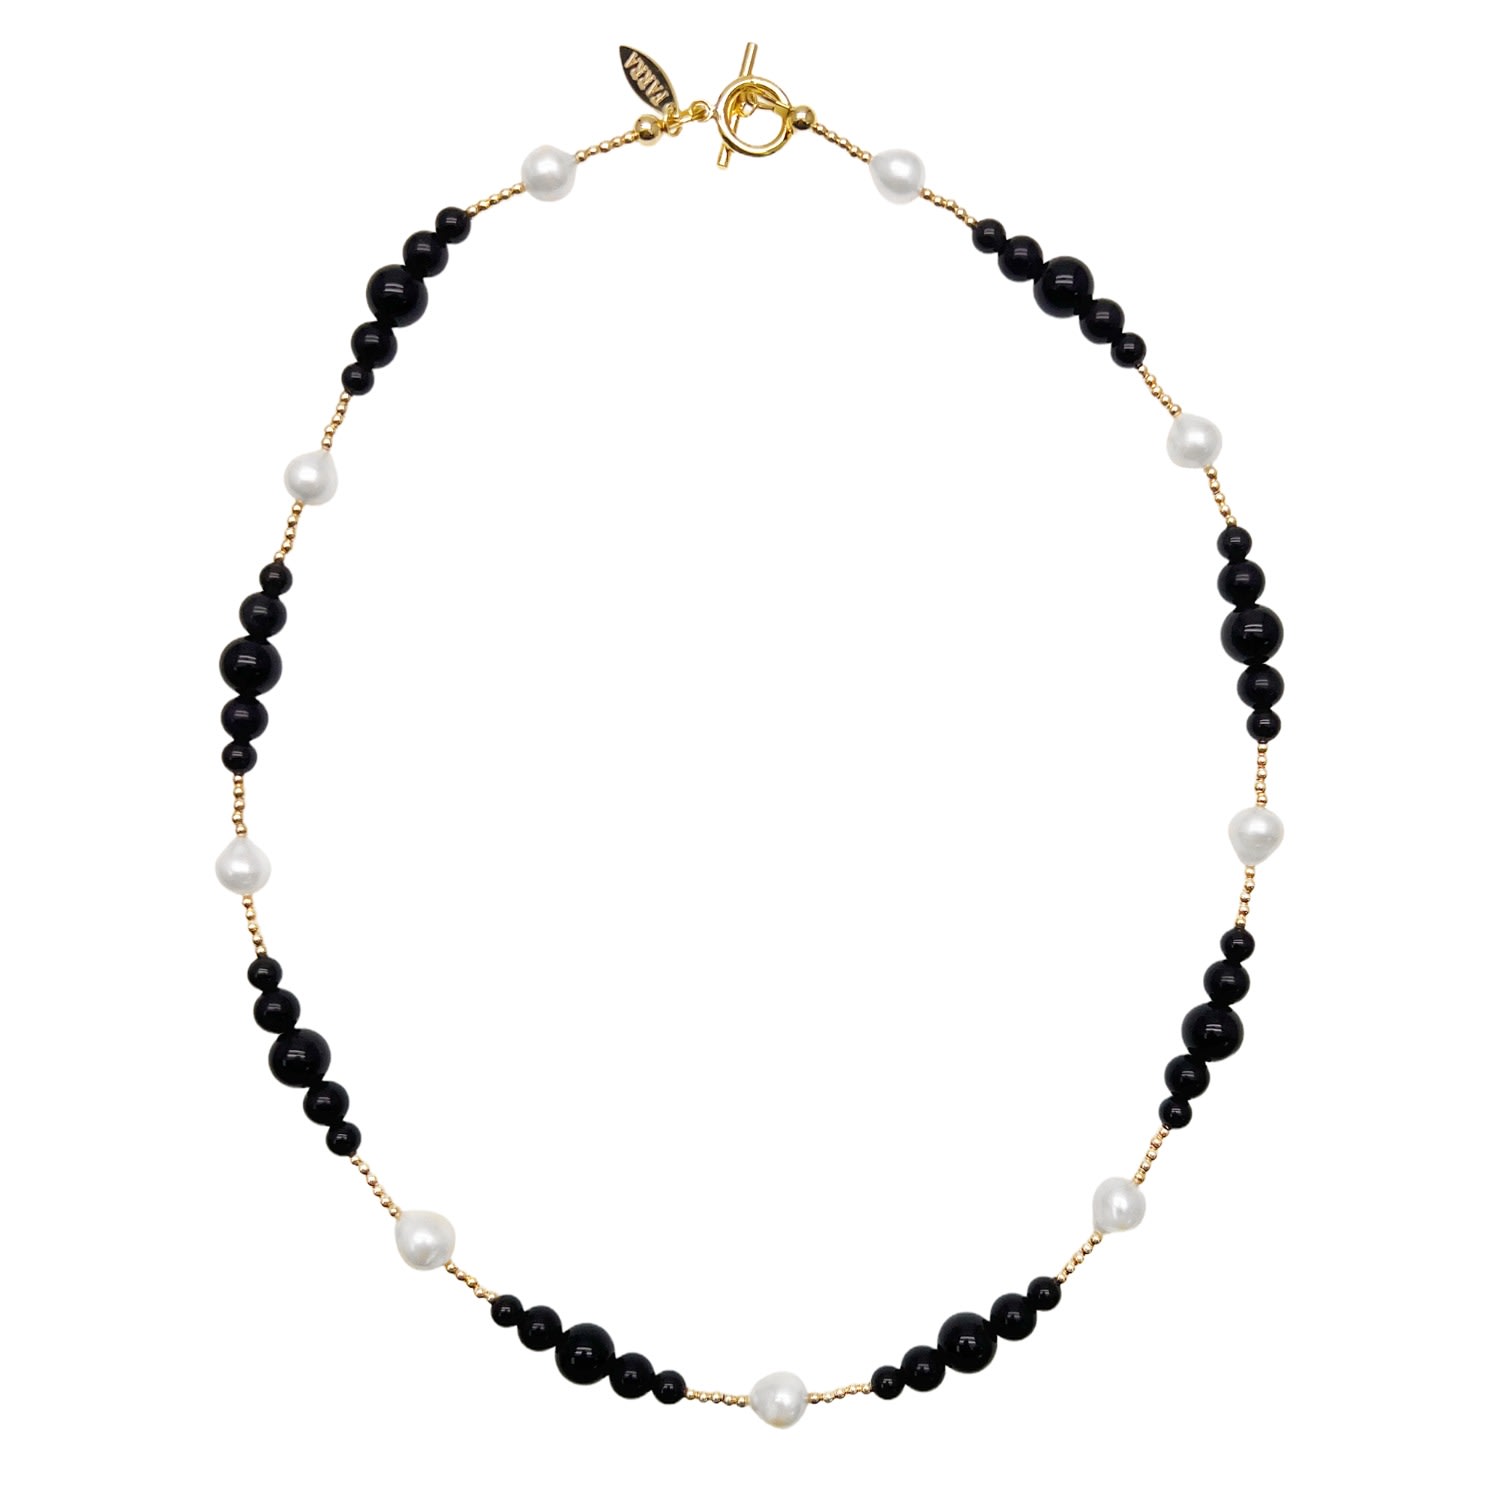 Farra Women's Black / White Exquisite Black Obsidian And White Freshwater Pearls Necklace In Multi